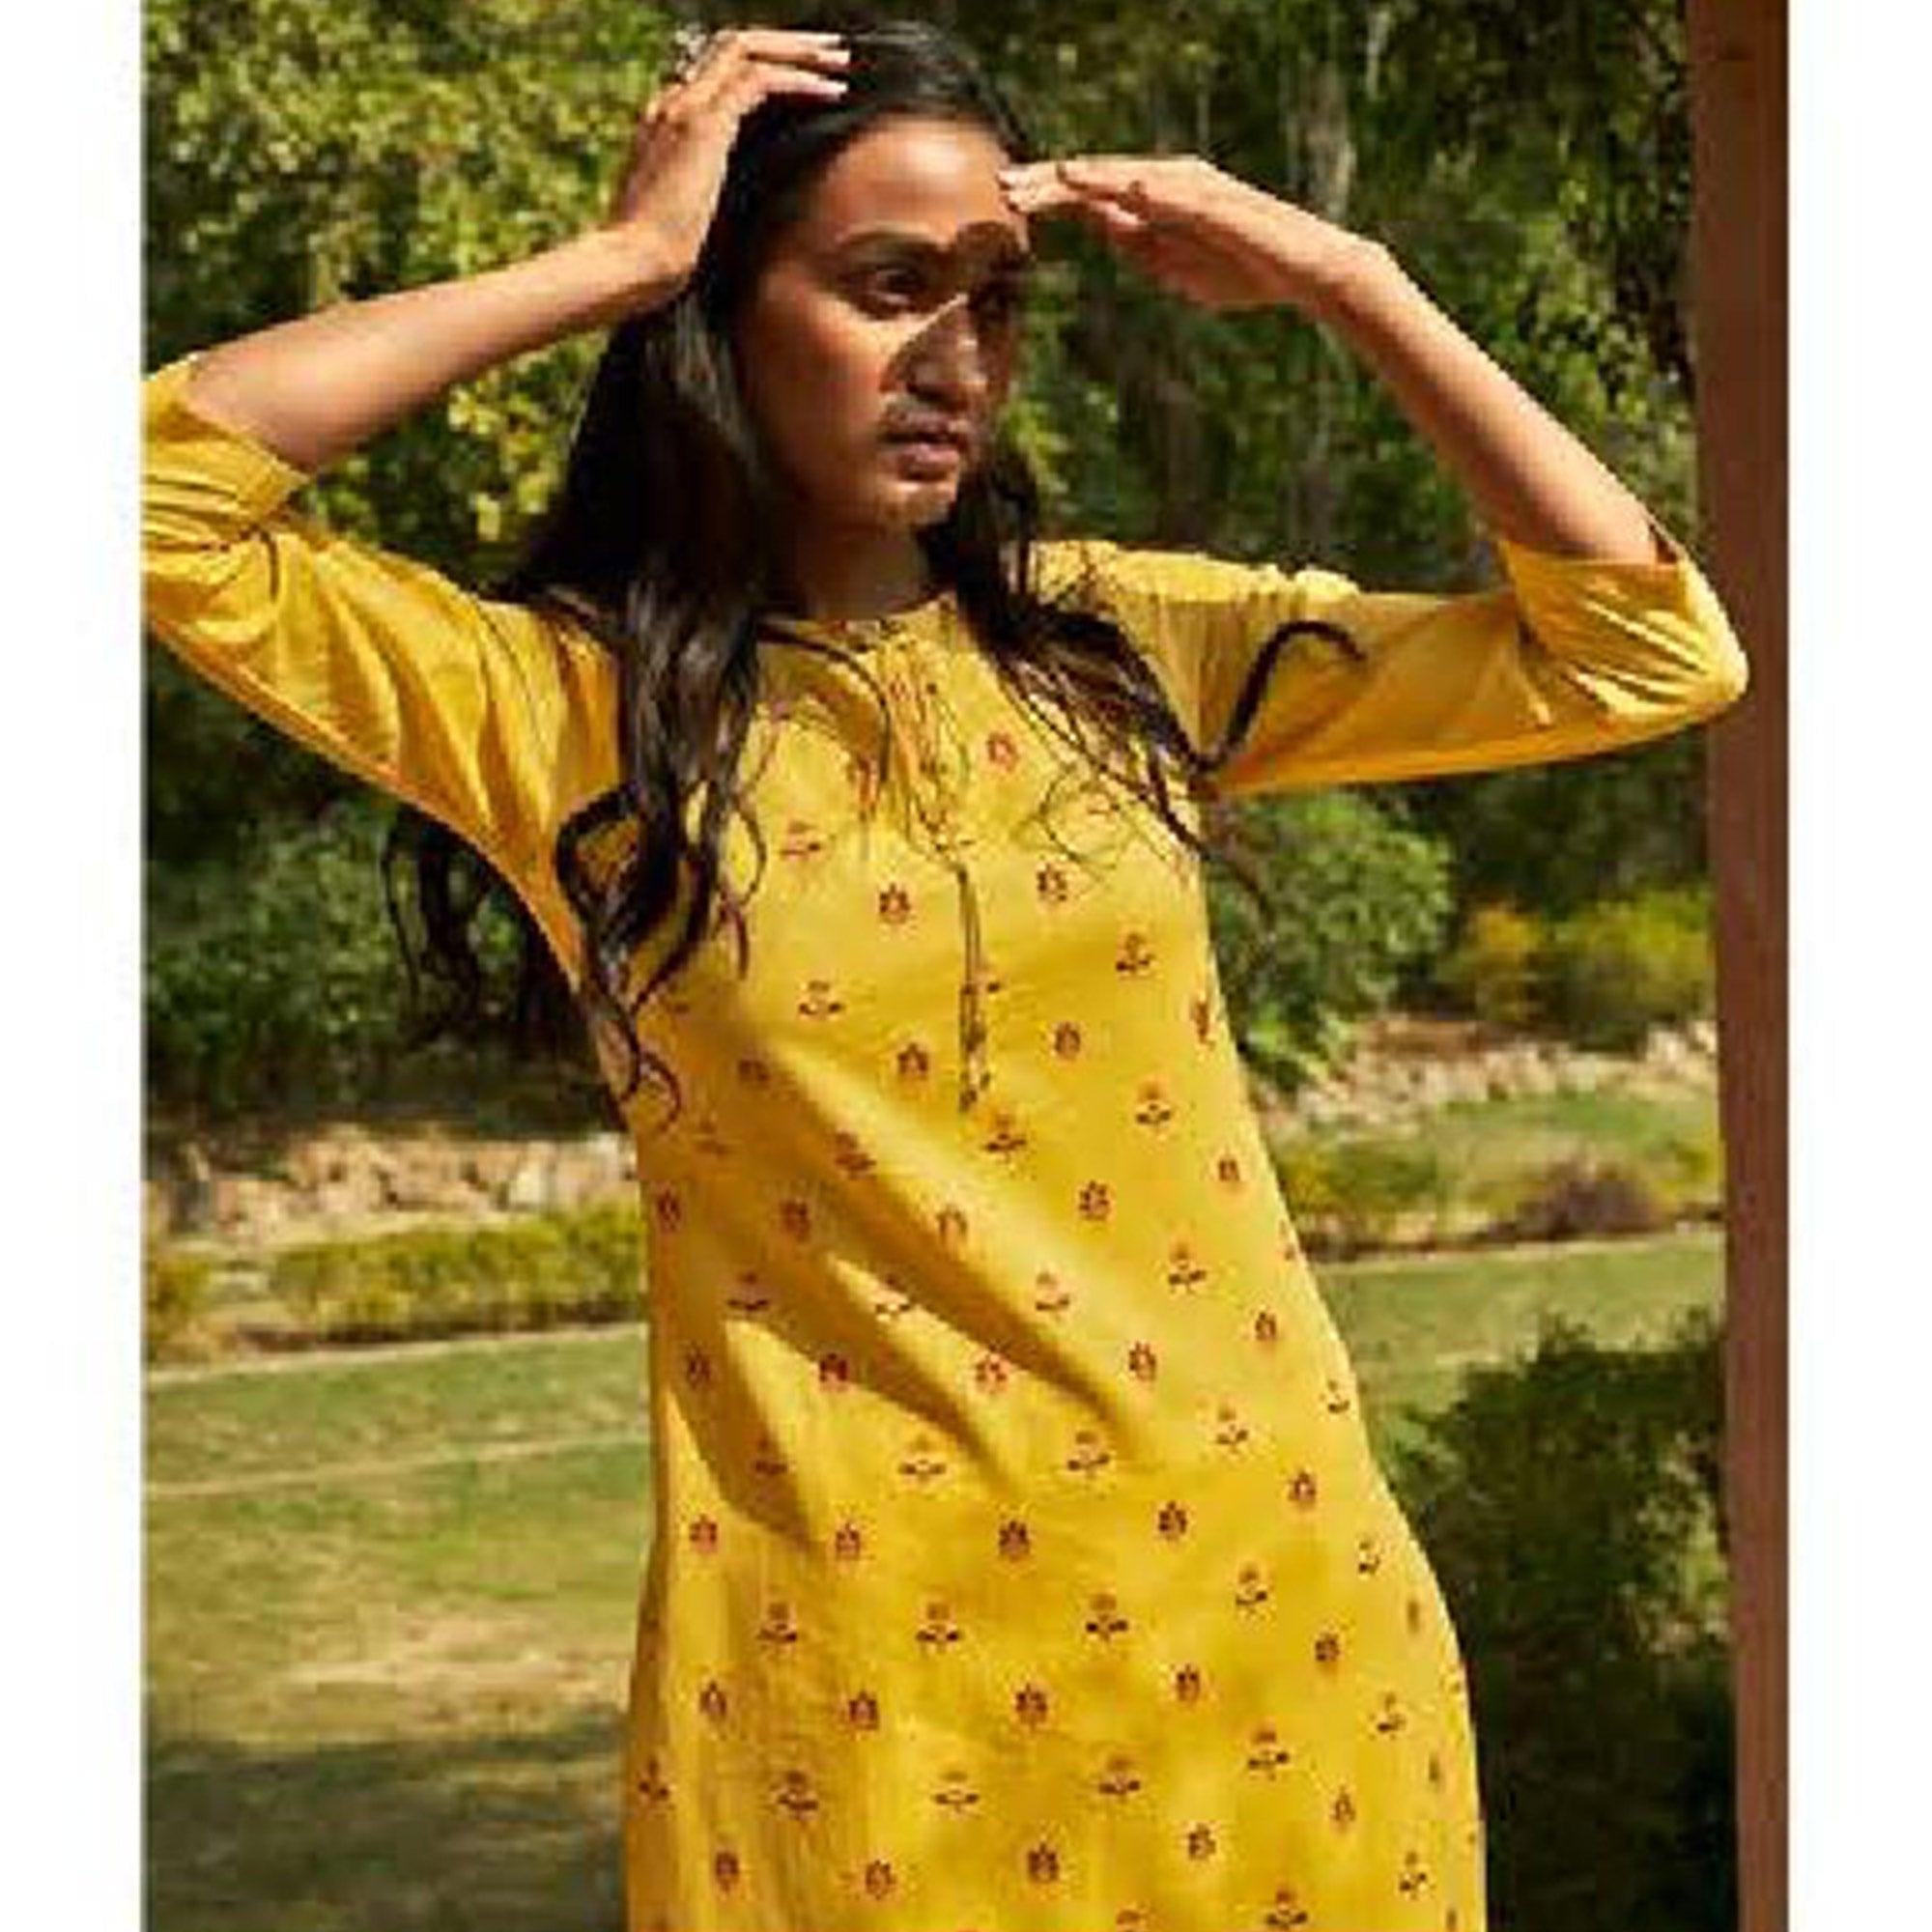 Buy DREAM DESI Sleeveless Kurti for Women Cotton for Plus Size & Small Size  Yellow Color (8XL). at Amazon.in